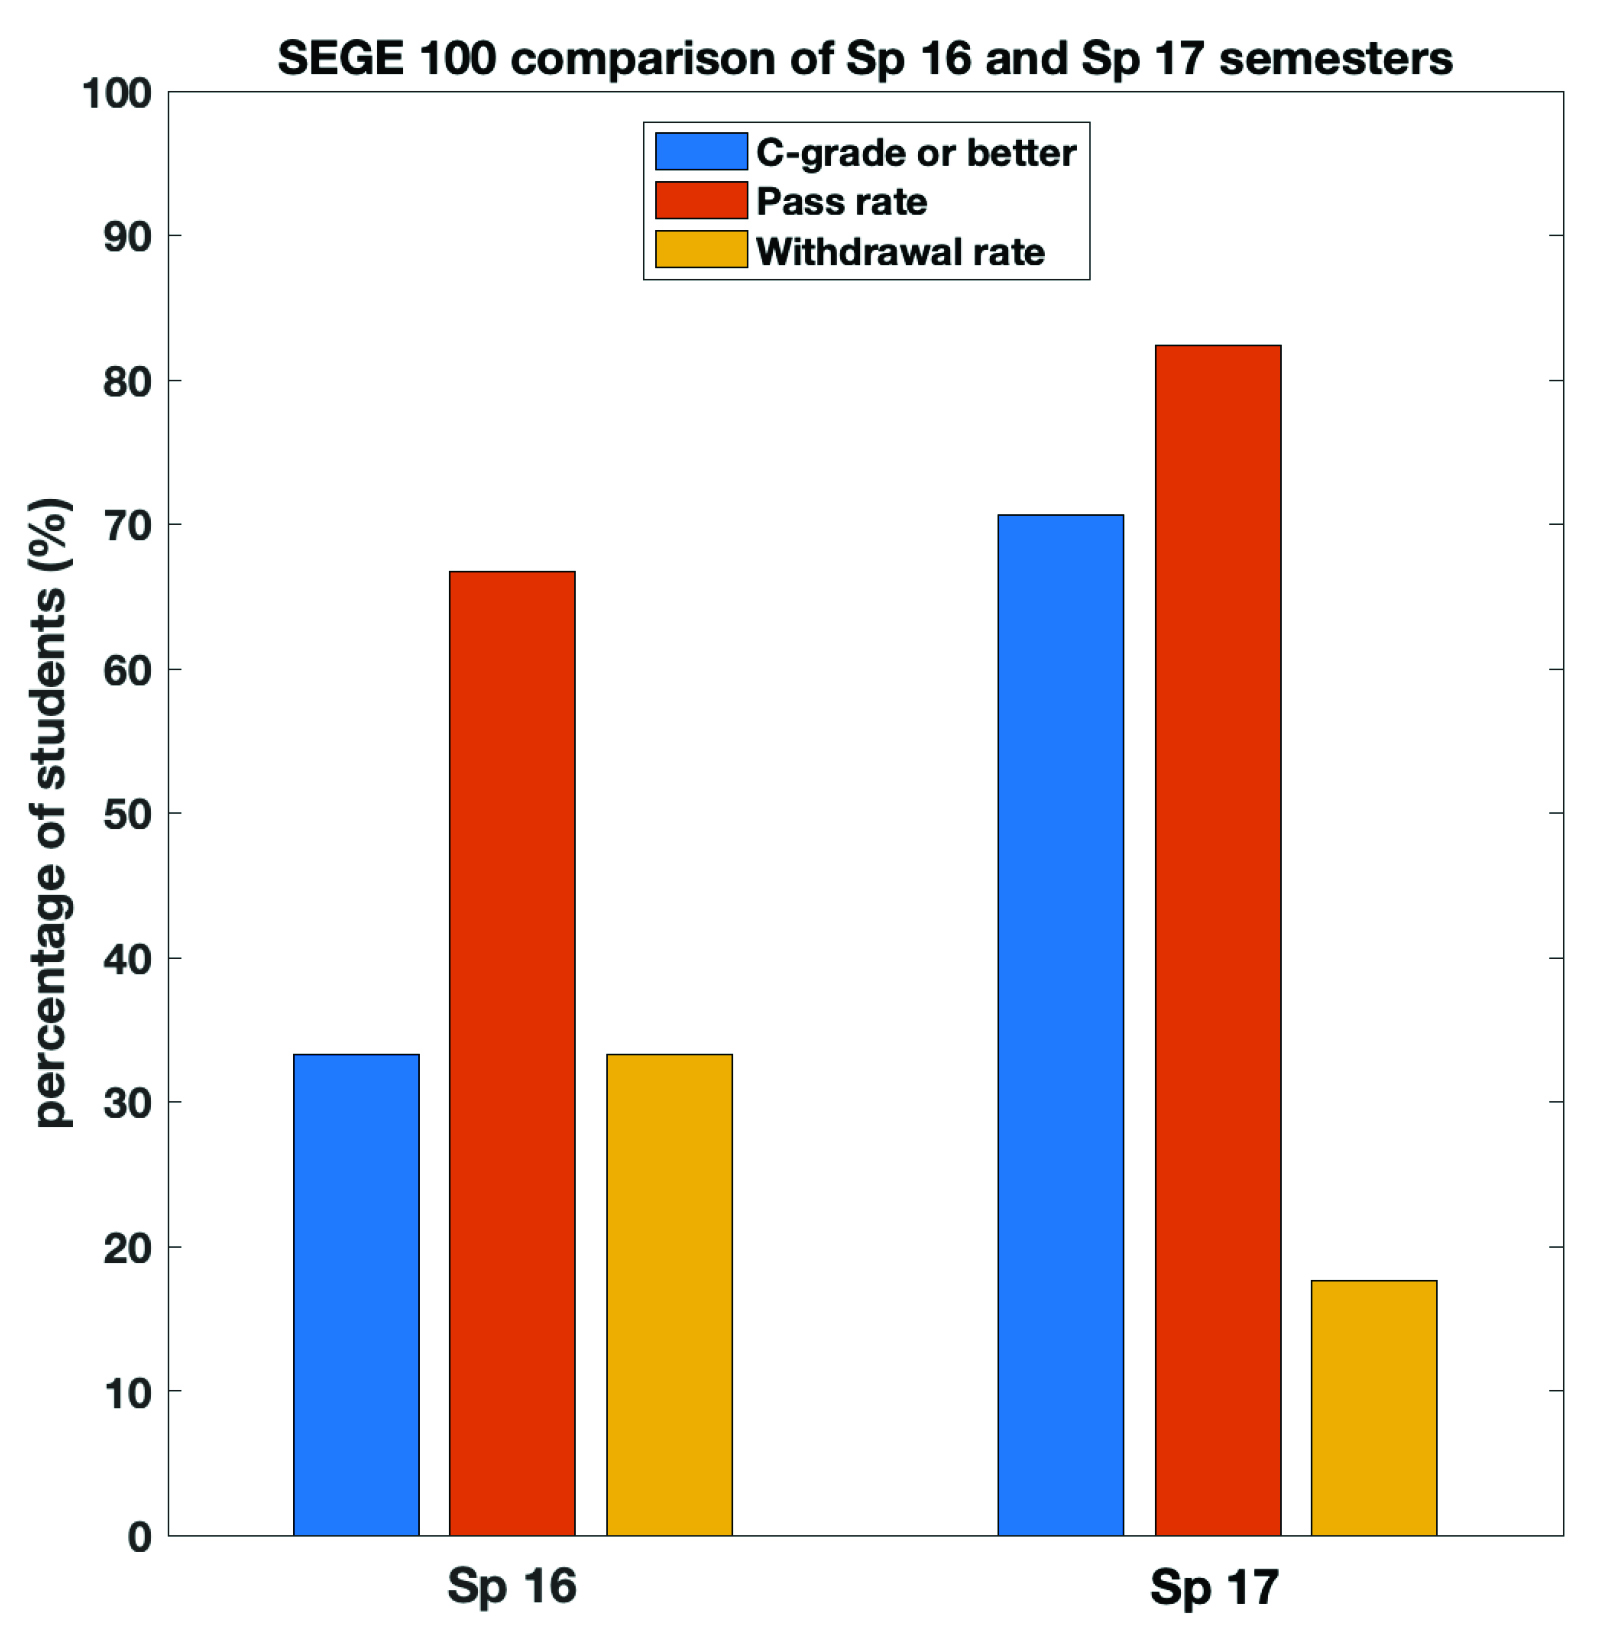 Comparison of C grade or better performance, passing rate, and withdrawal rate of students enrolled in SEGE 100 (PHY/CHEM/BIO 100) course during Sp16 and Sp17 semesters.